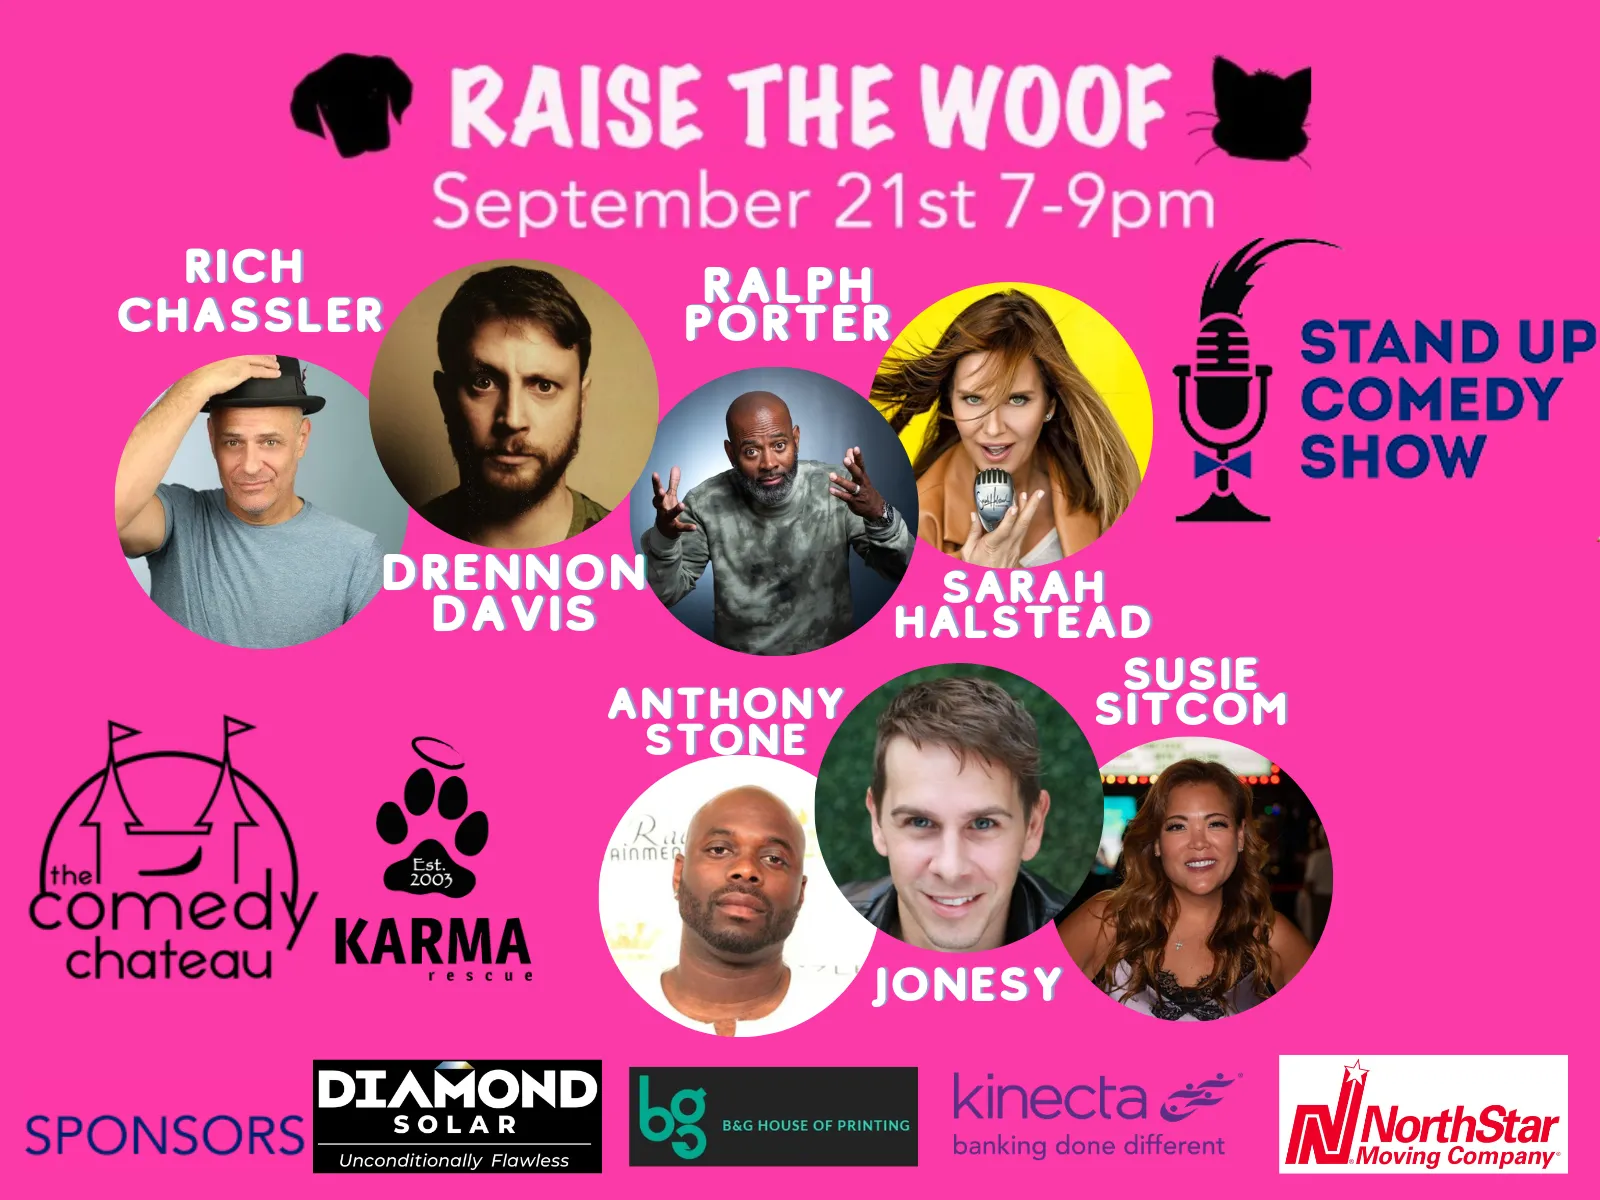 Banner advertising Raise the Woof show on September 21st at 7pm. With photos of 7 comedians - Susie Sitcom, Rich Chassler, Sarah Halstead, Jonesy, Ralph Porter, Anthony Stone and Drennon Davis. Image also features sponsors logos: Diamond Solar, B&G Printing, Kinecta and Northstar Moving Company. 